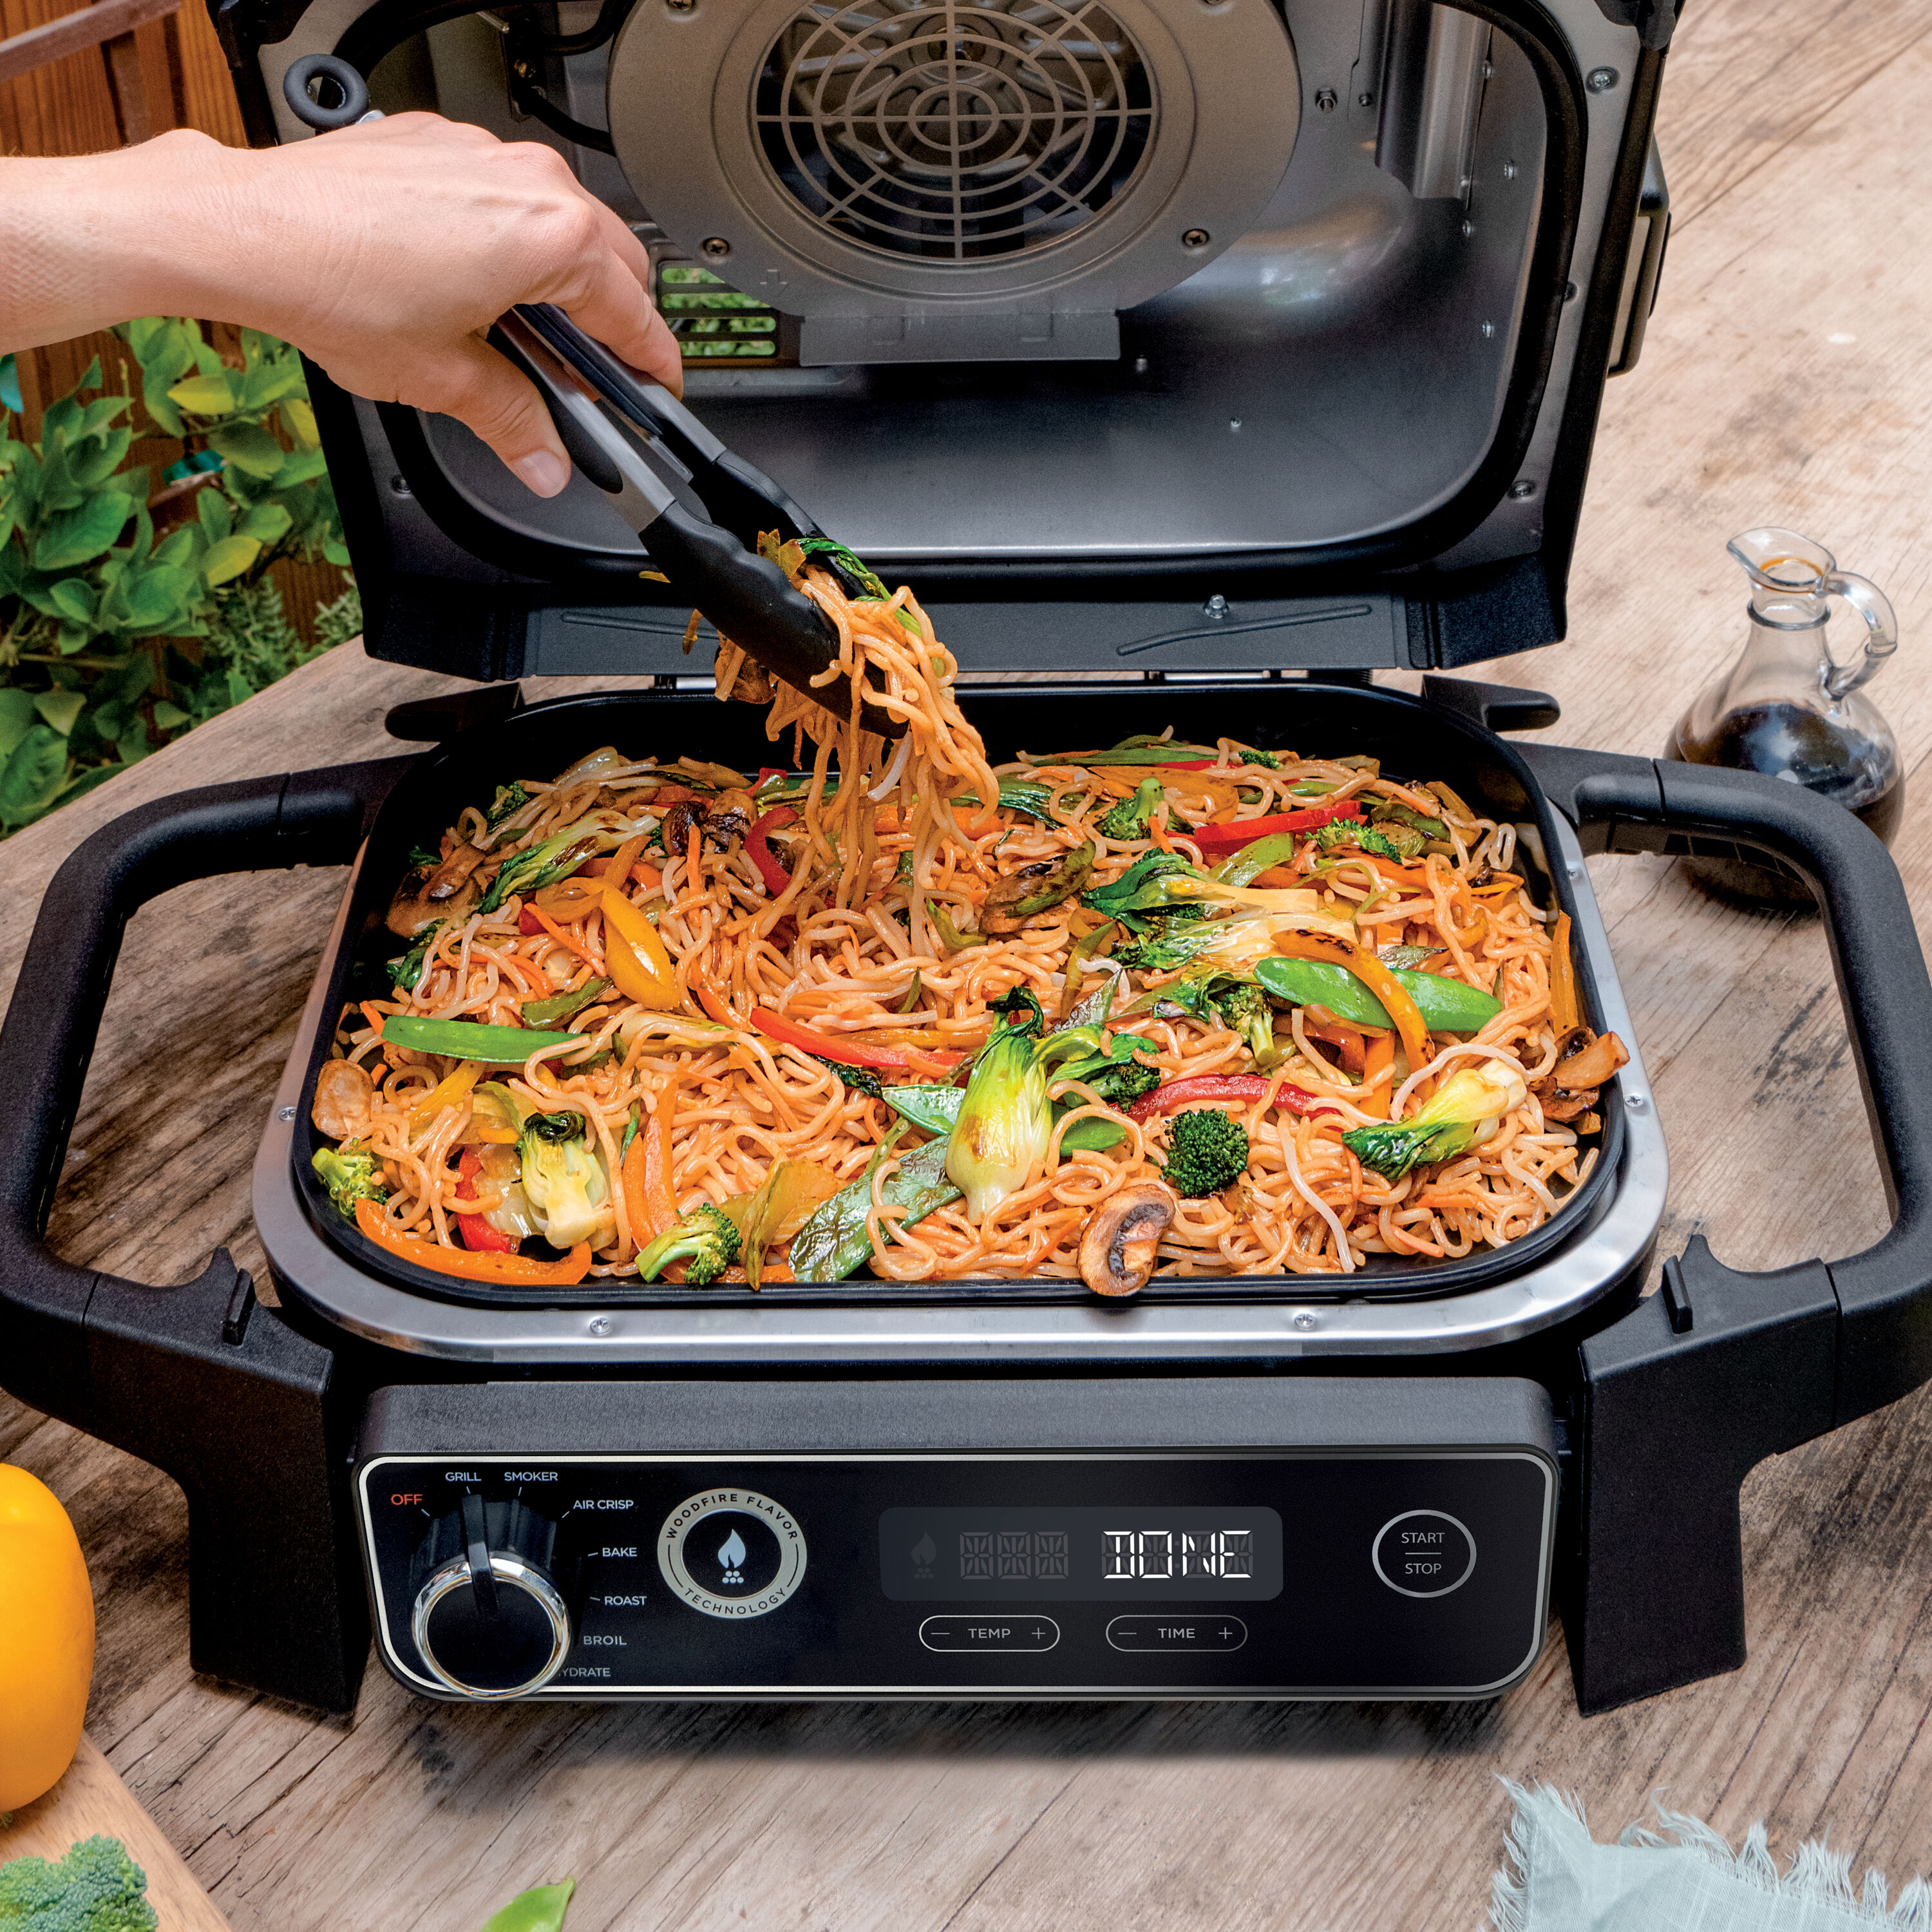 The Ninja Foodi XL Pro indoor grill is perfect for apartment